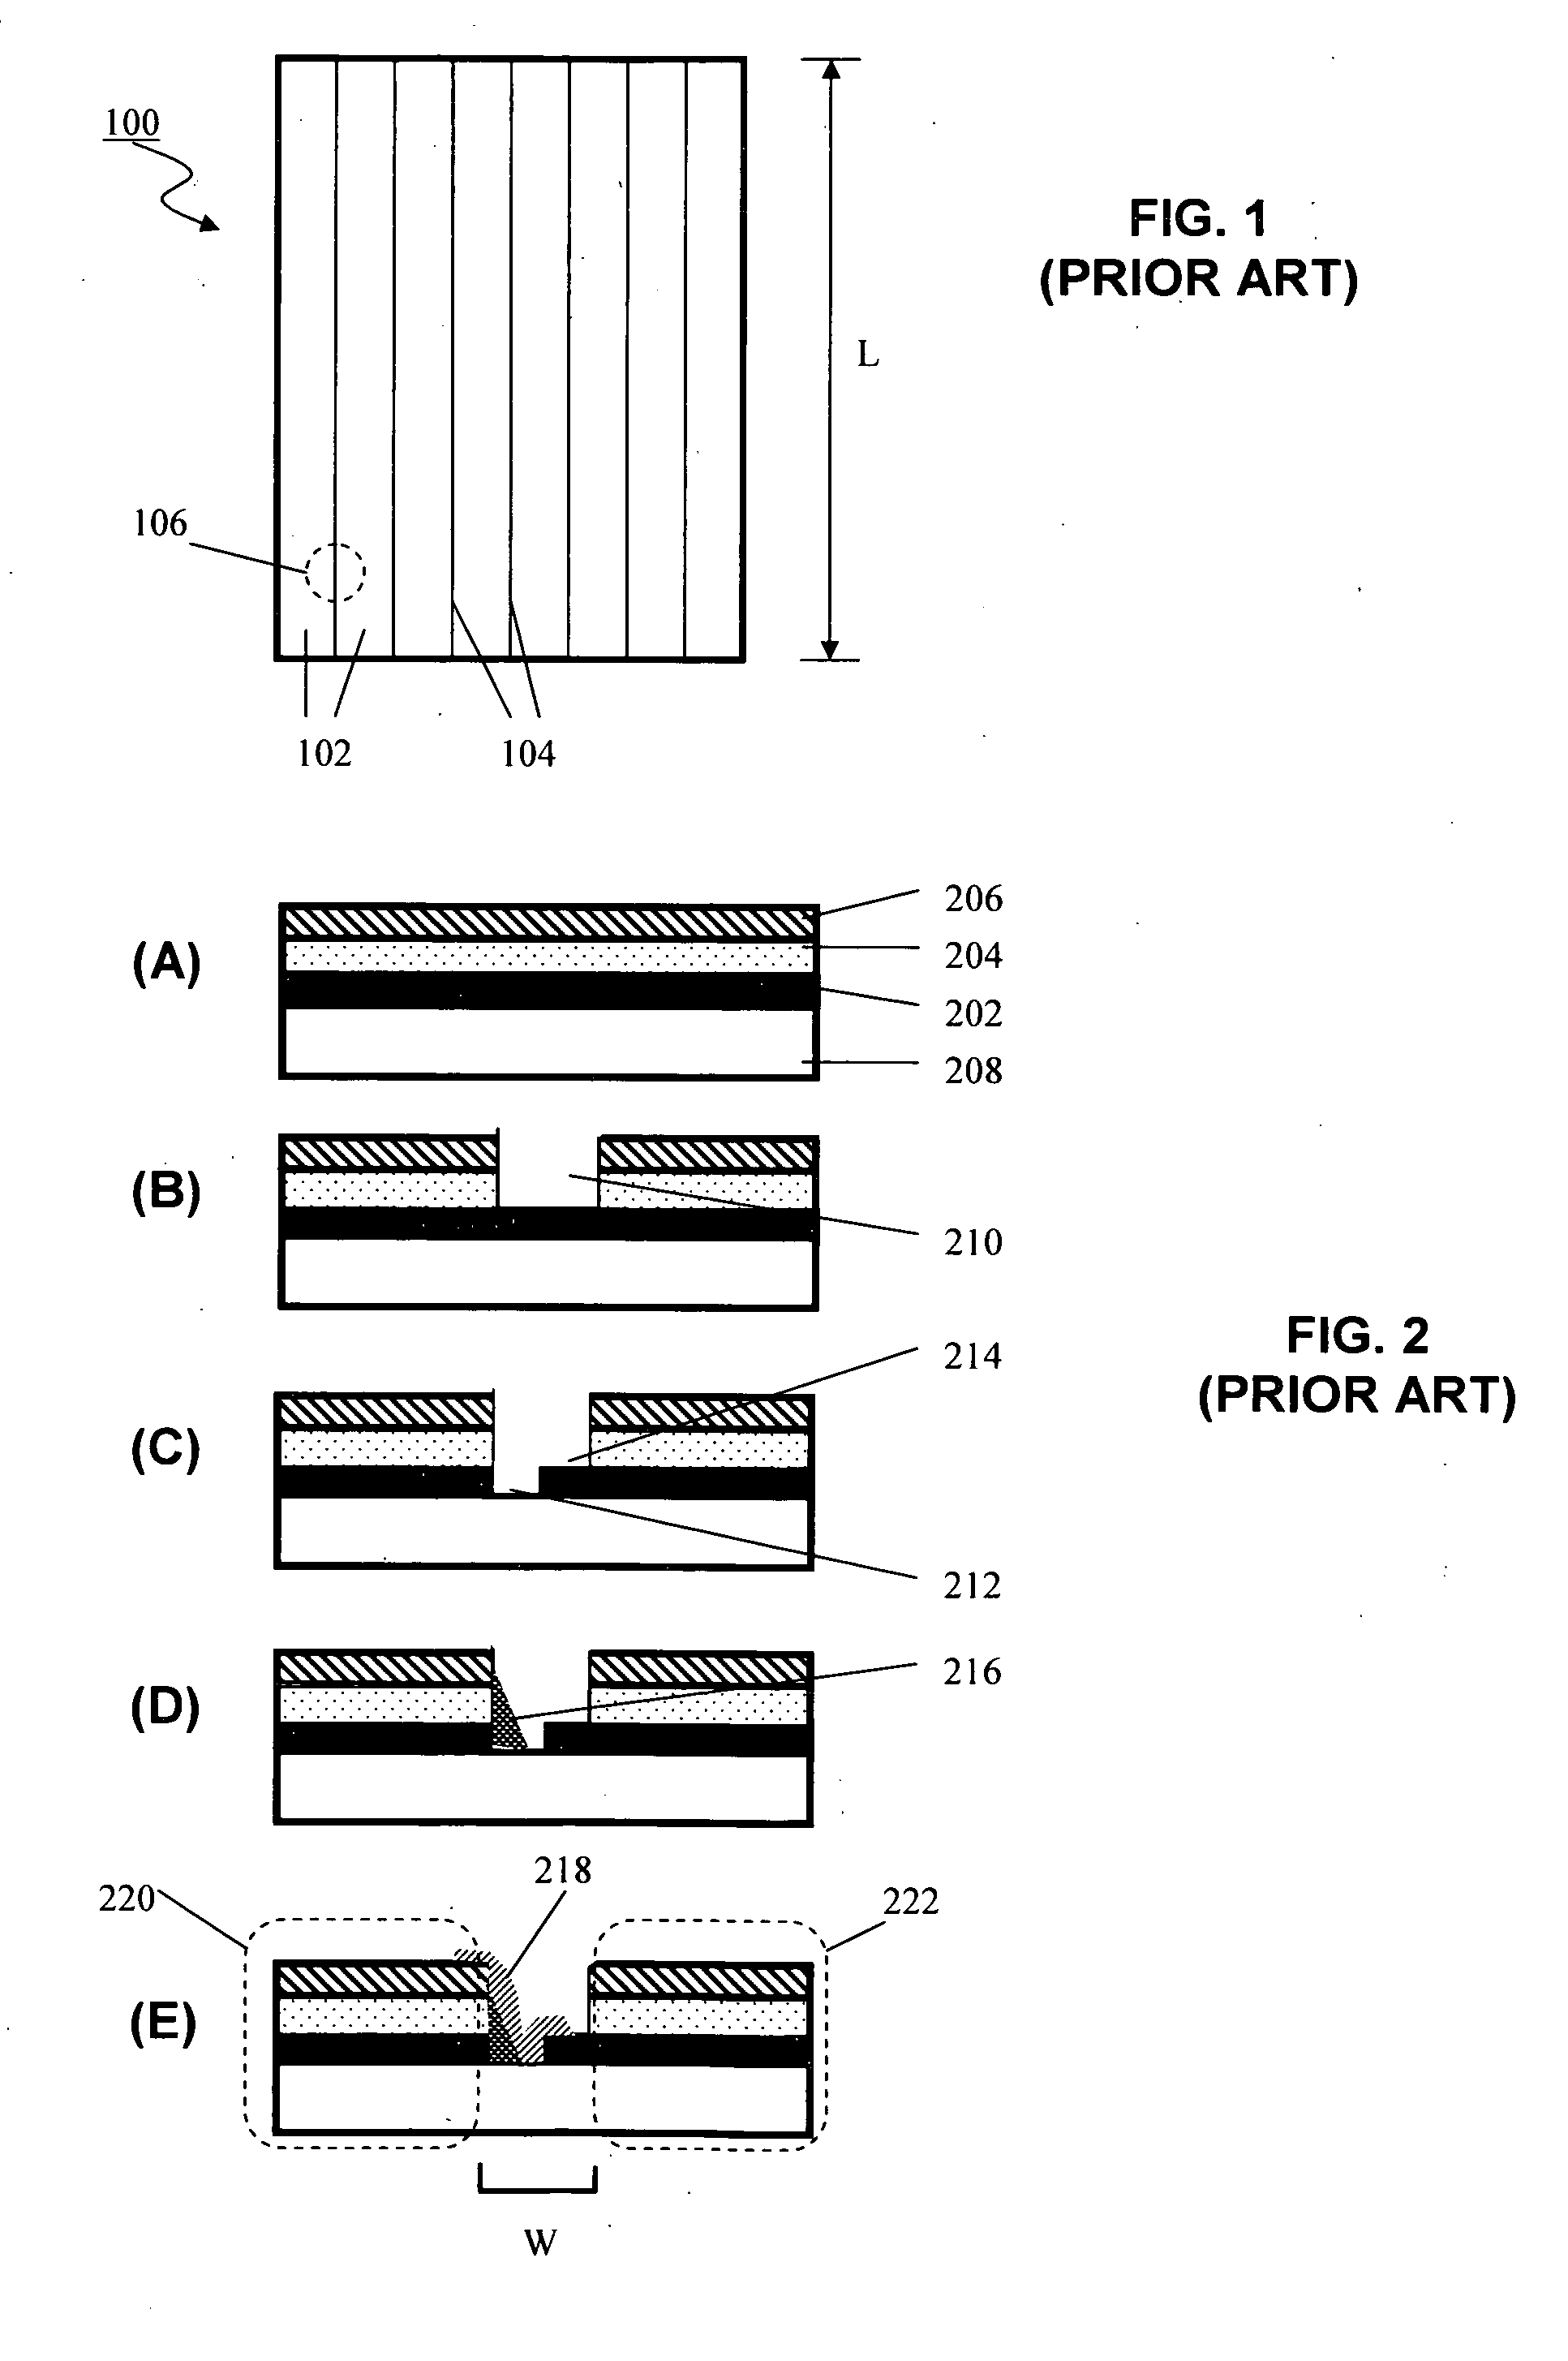 Method for forming thin film photovoltaic interconnects using self-aligned process